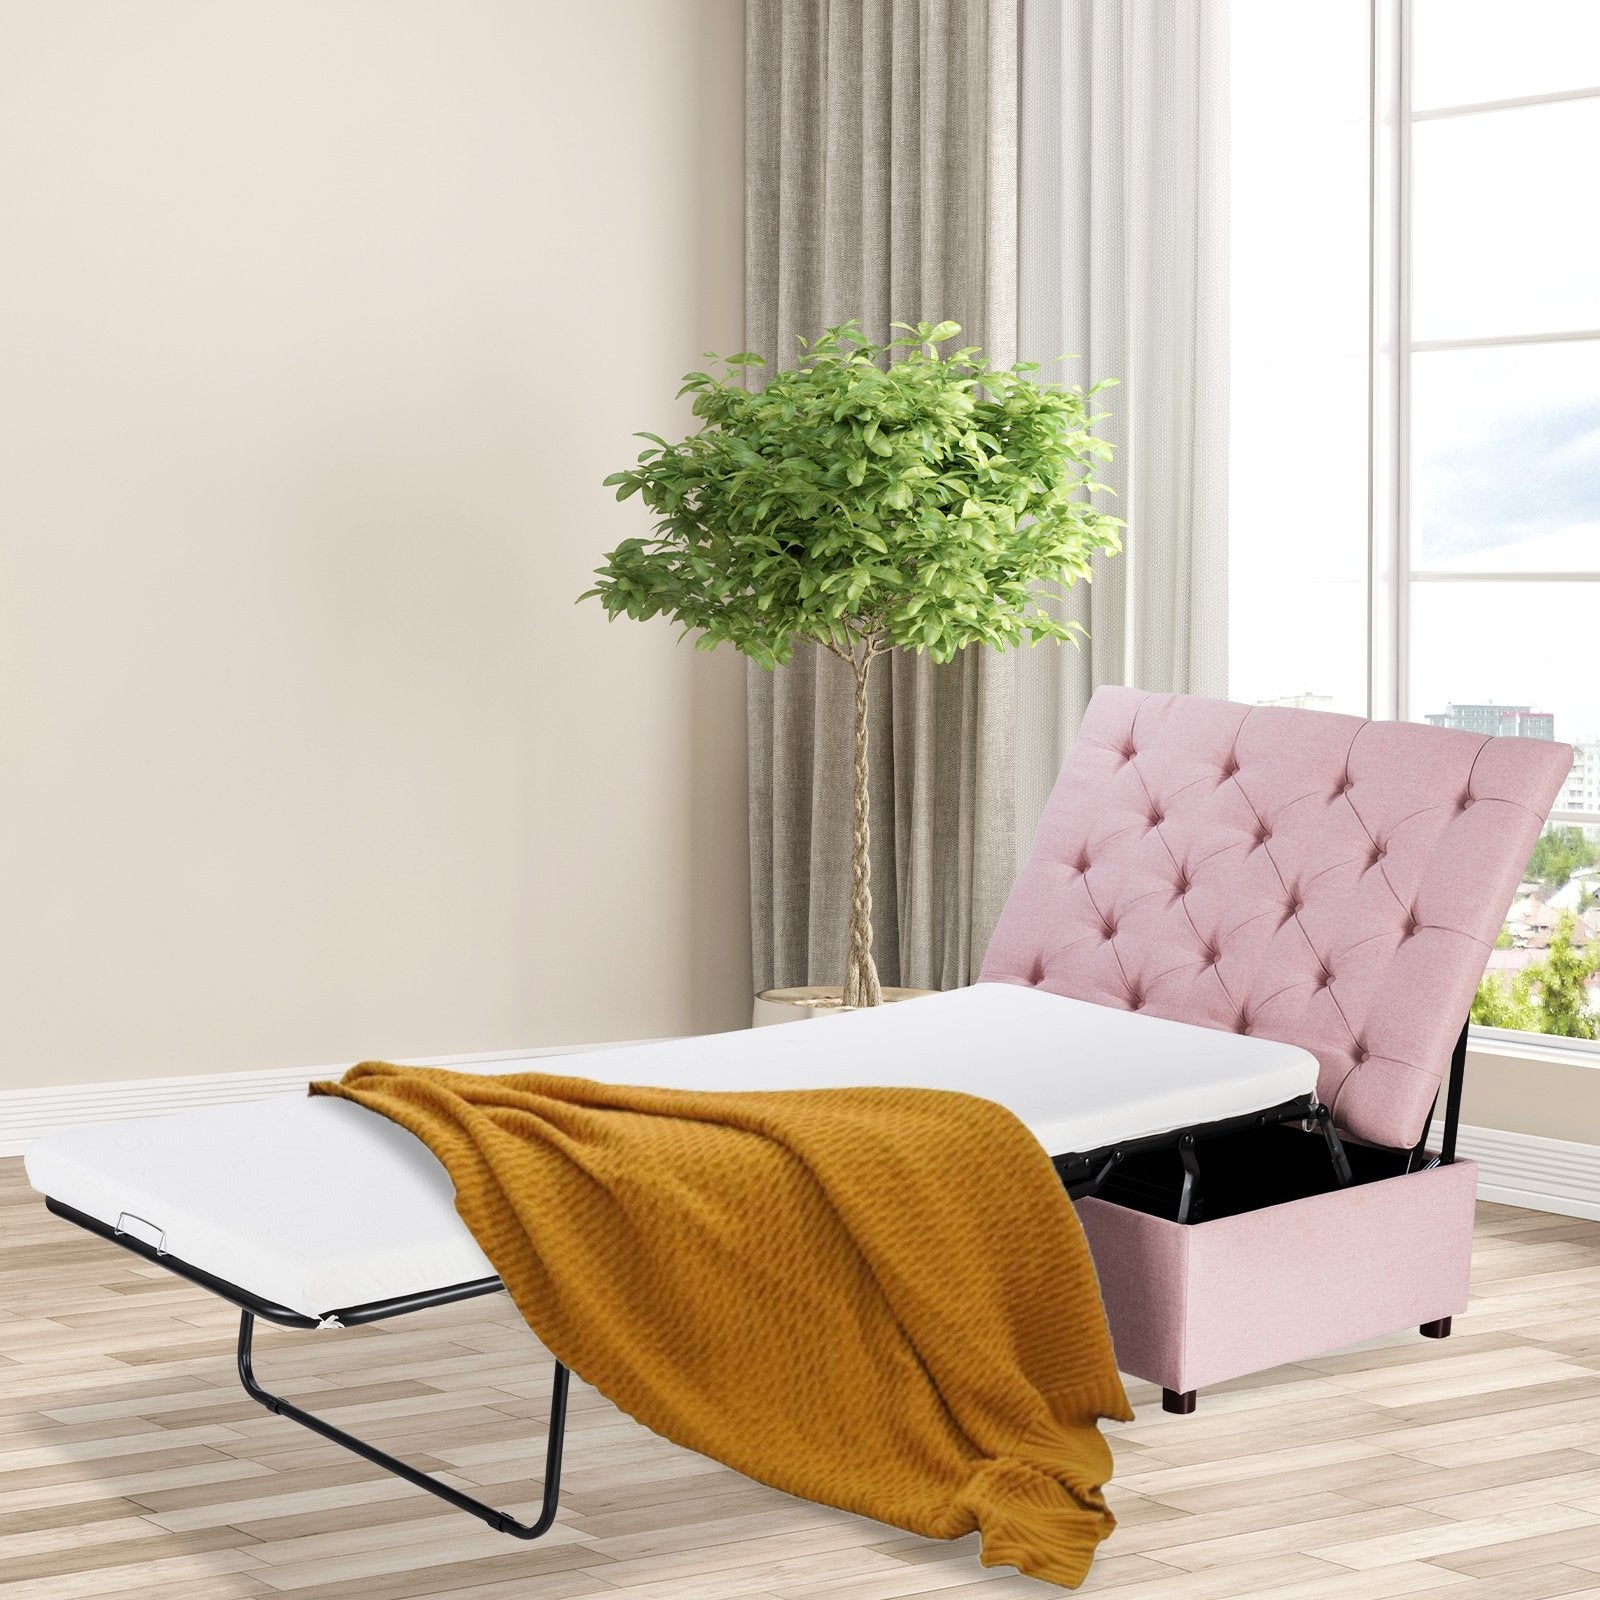 Folding Ottoman Sleeper Bed with Mattress for Guest Bed and Office Nap, Pink at Gallery Canada